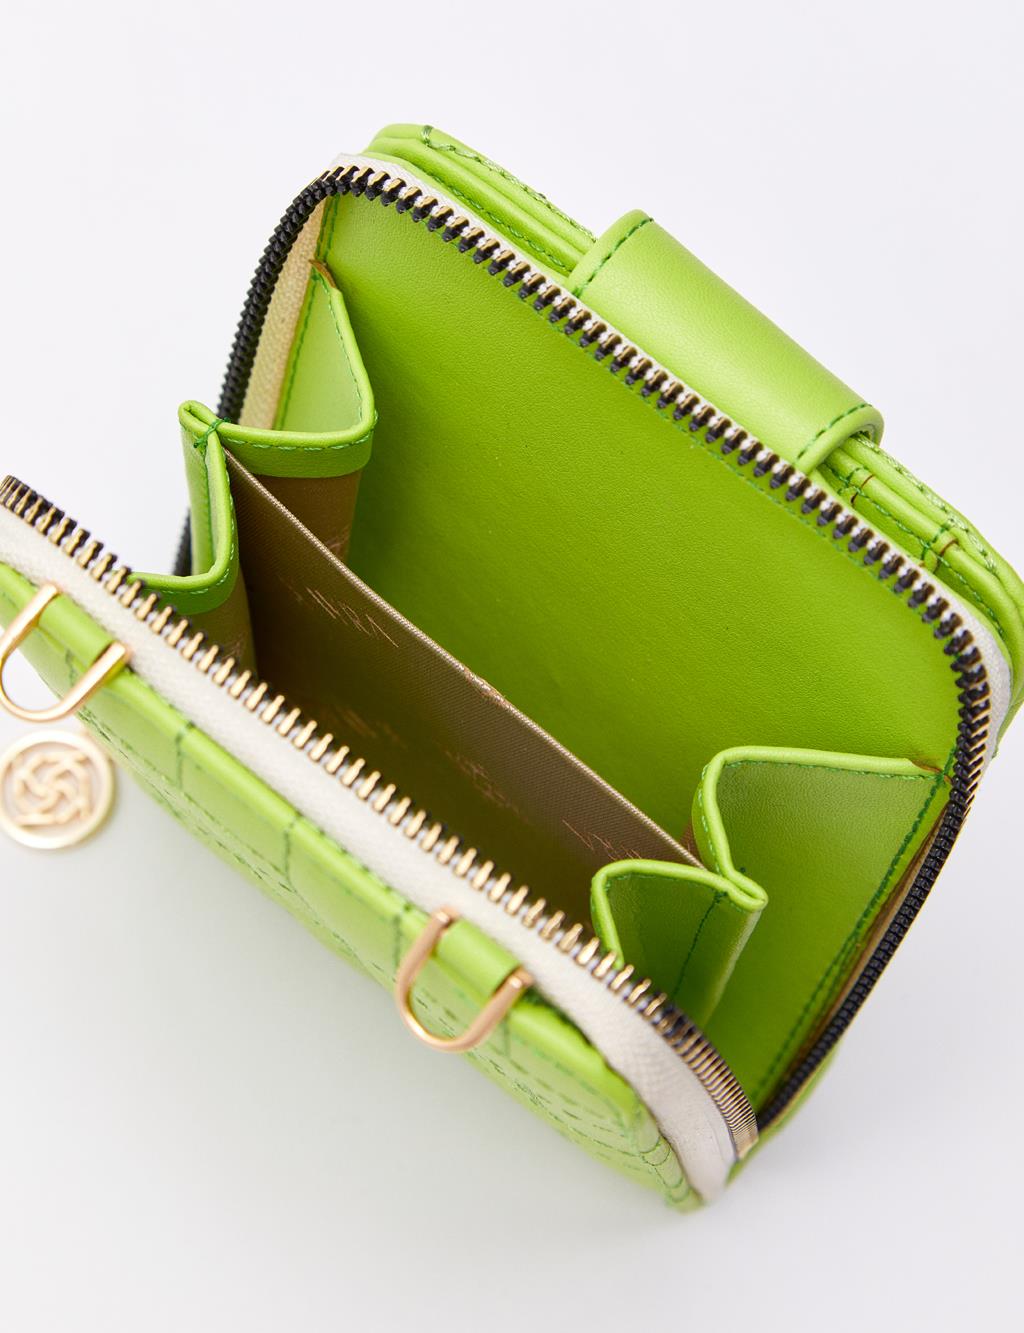 Quilted Square Bag Wallet Pistachio Green